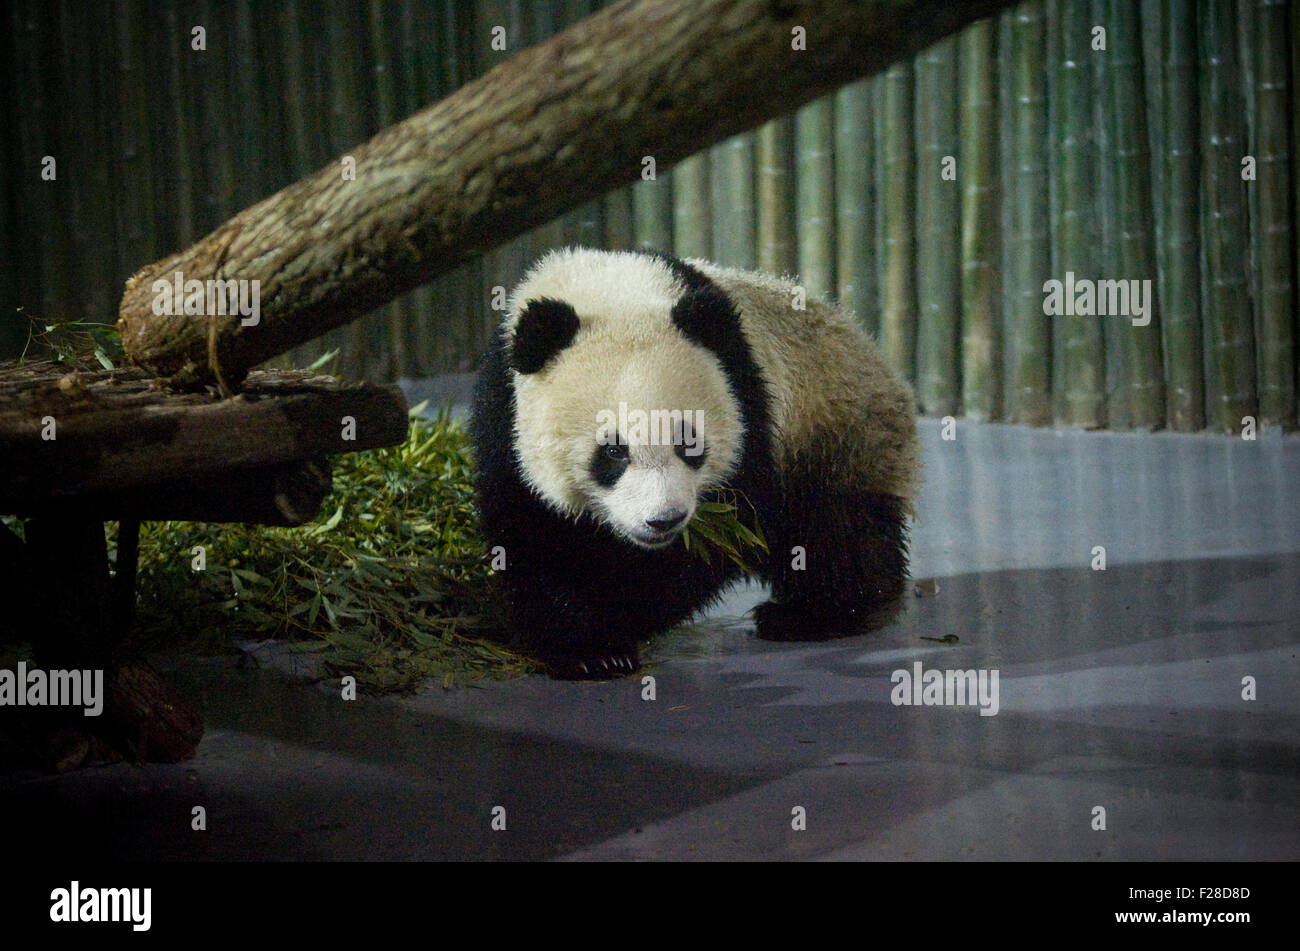 A giant panda for the 2010 World Expo is seen at the Shanghai Zoo, January 5, 2010. Ten giant pandas selected from Bifengxia pan Stock Photo